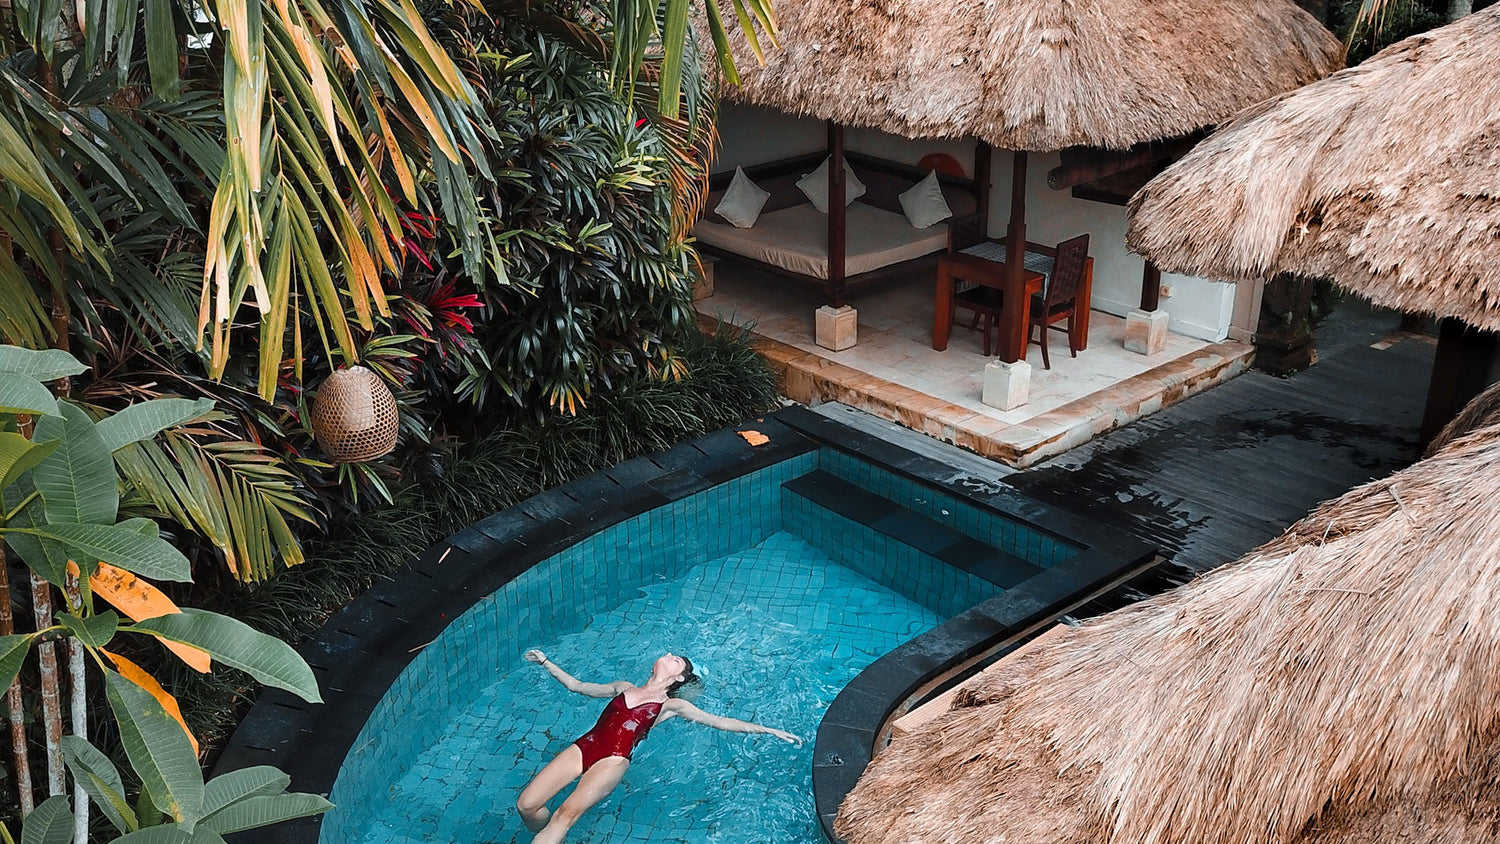 tropical pool with grass huts next to jungle foilage. Woman in red costume floating on her back relaxing in the pool.